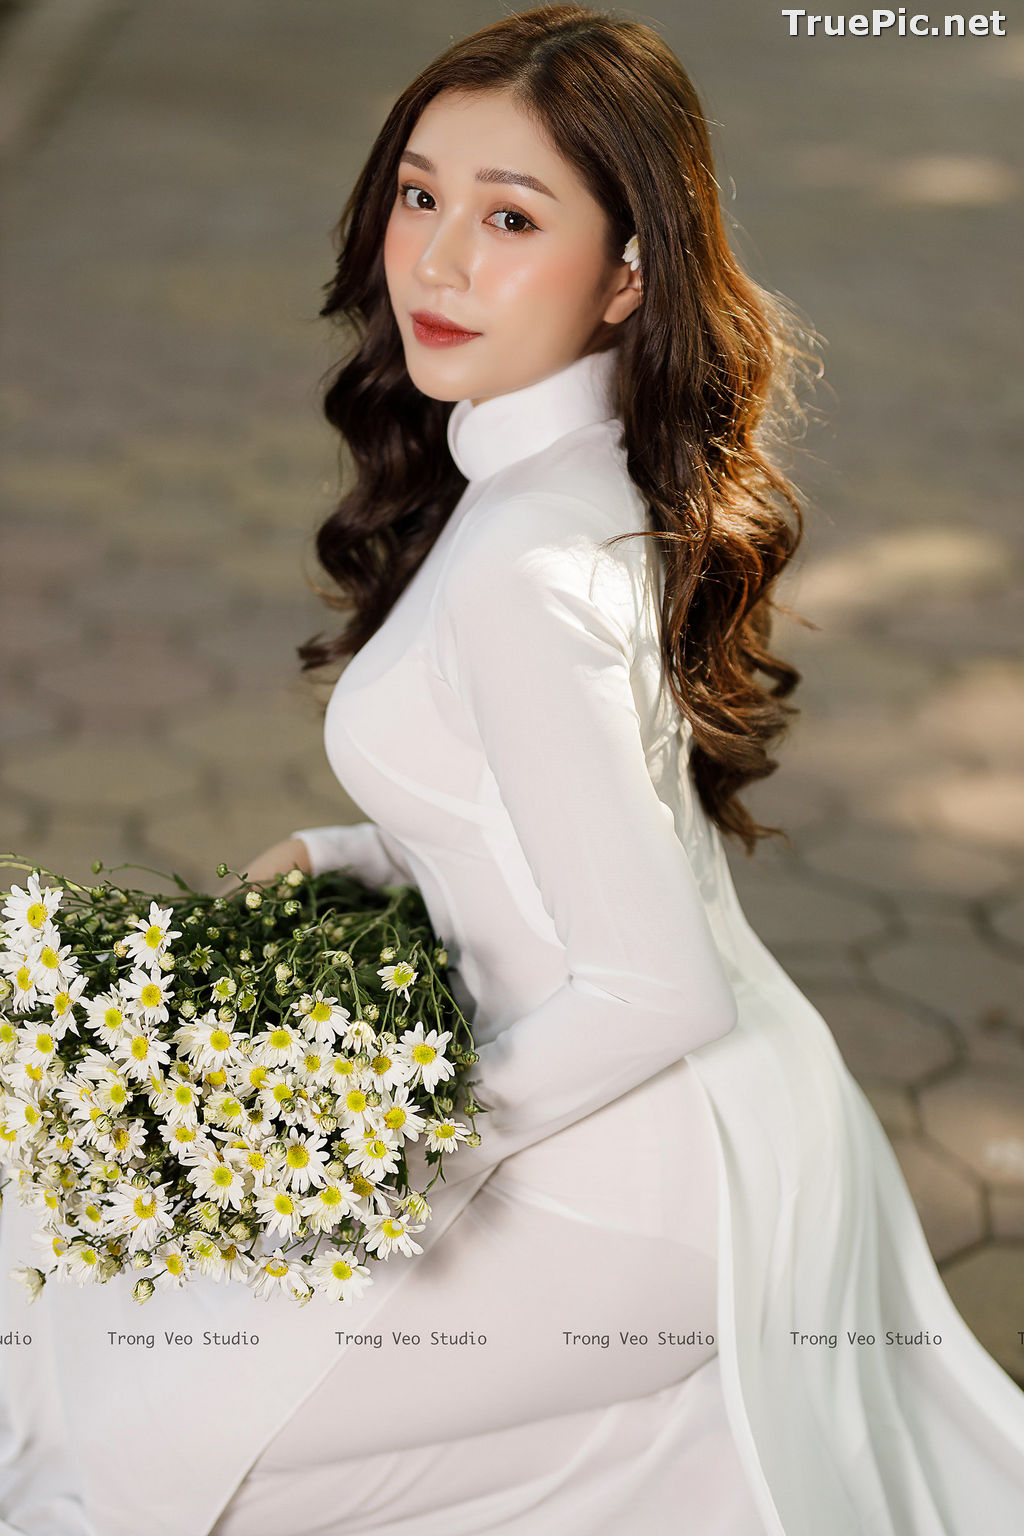 Image The Beauty of Vietnamese Girls with Traditional Dress (Ao Dai) #1 - TruePic.net - Picture-23